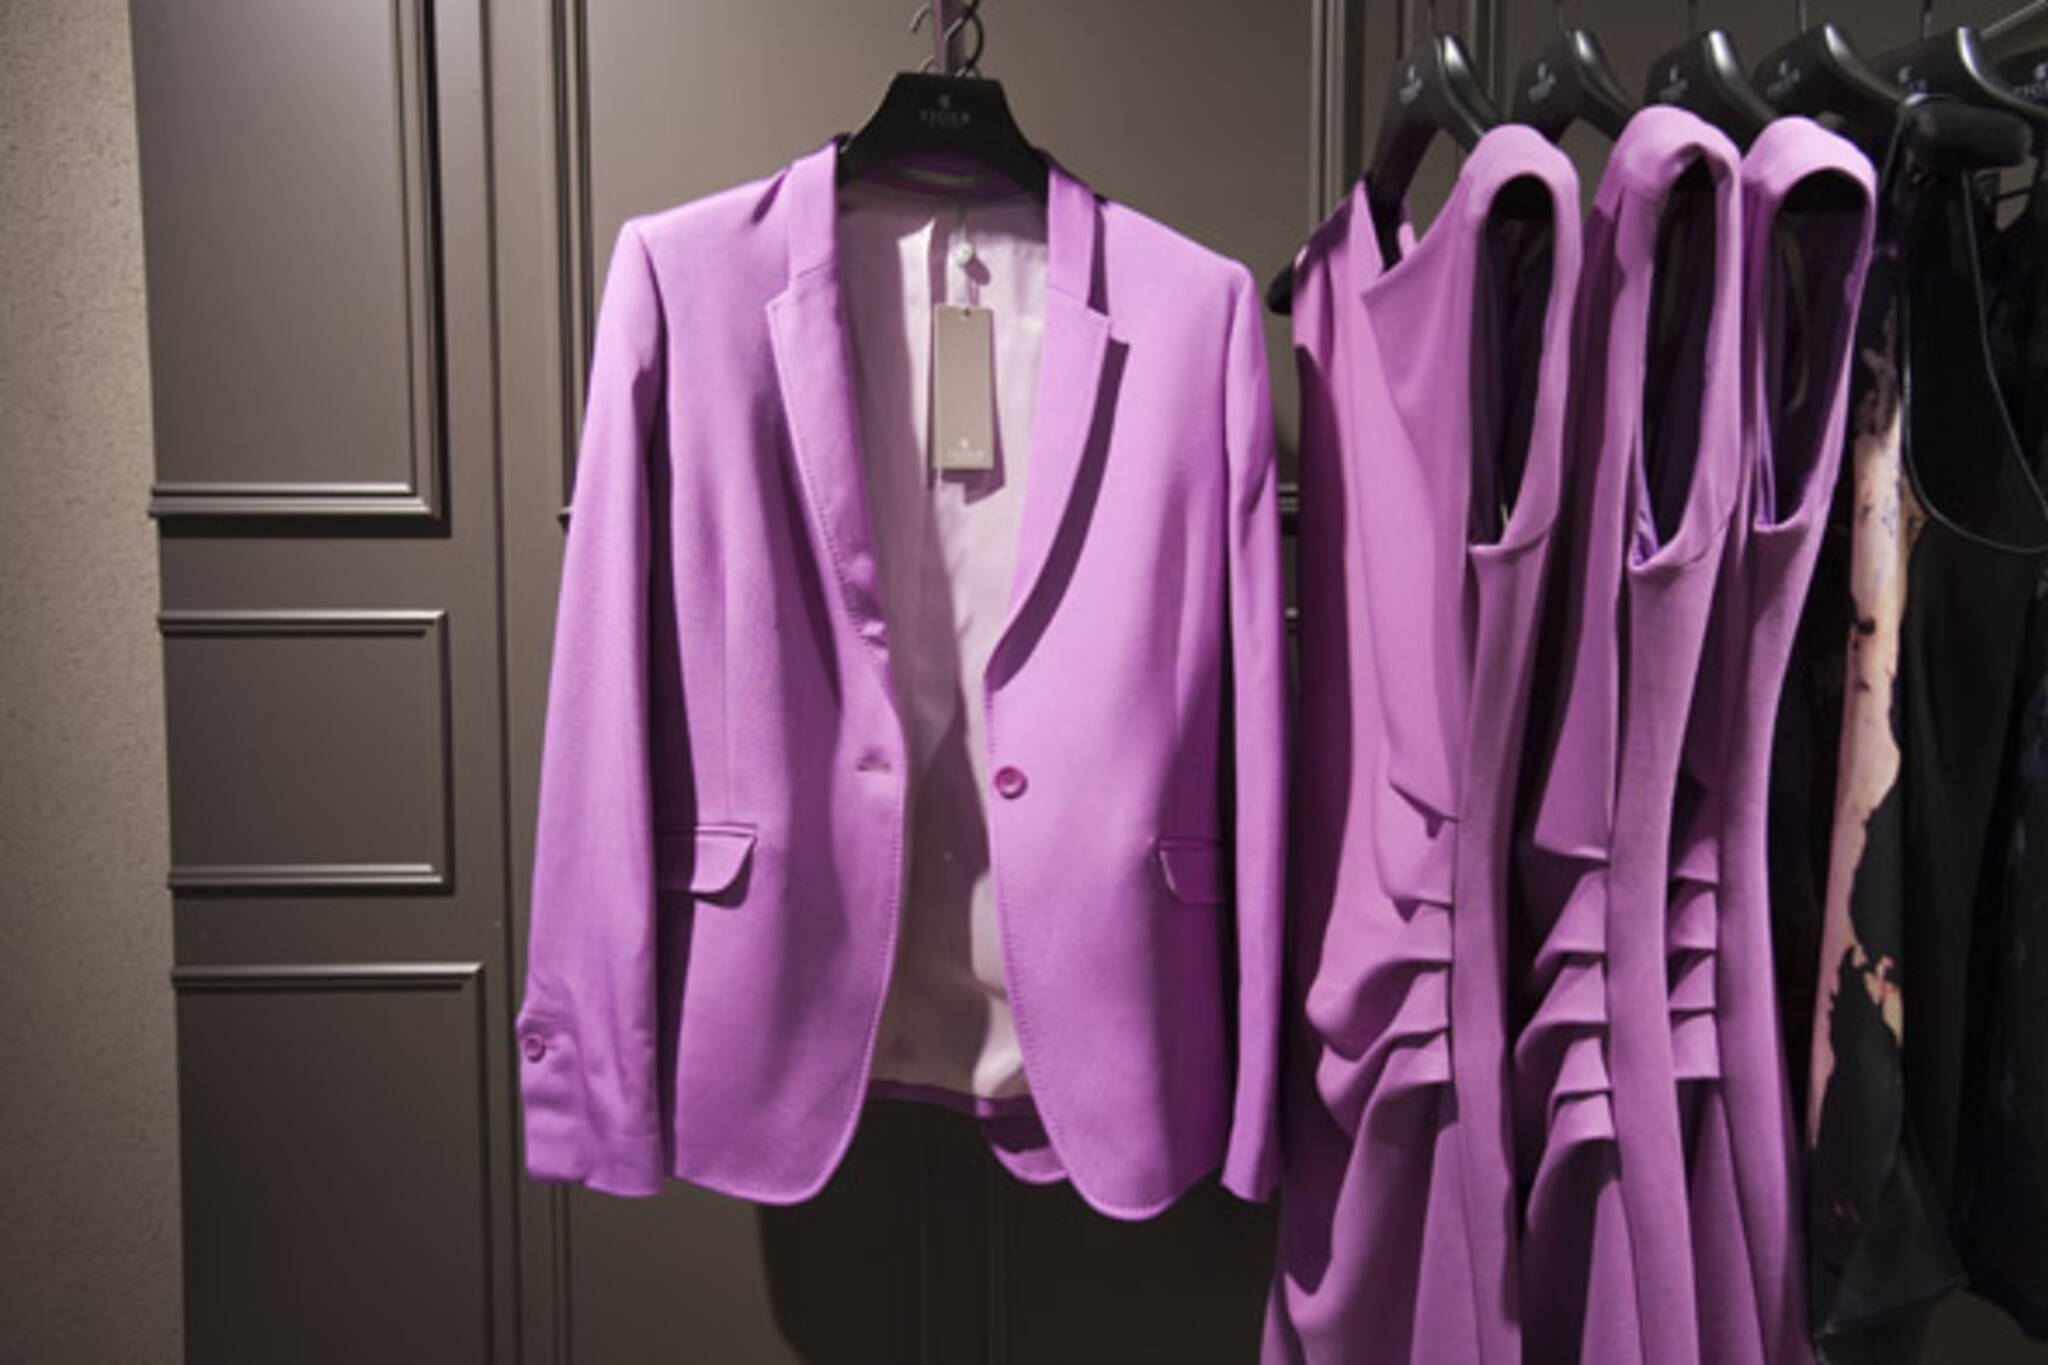 Women's Suits for sale in Chestermere, Alberta